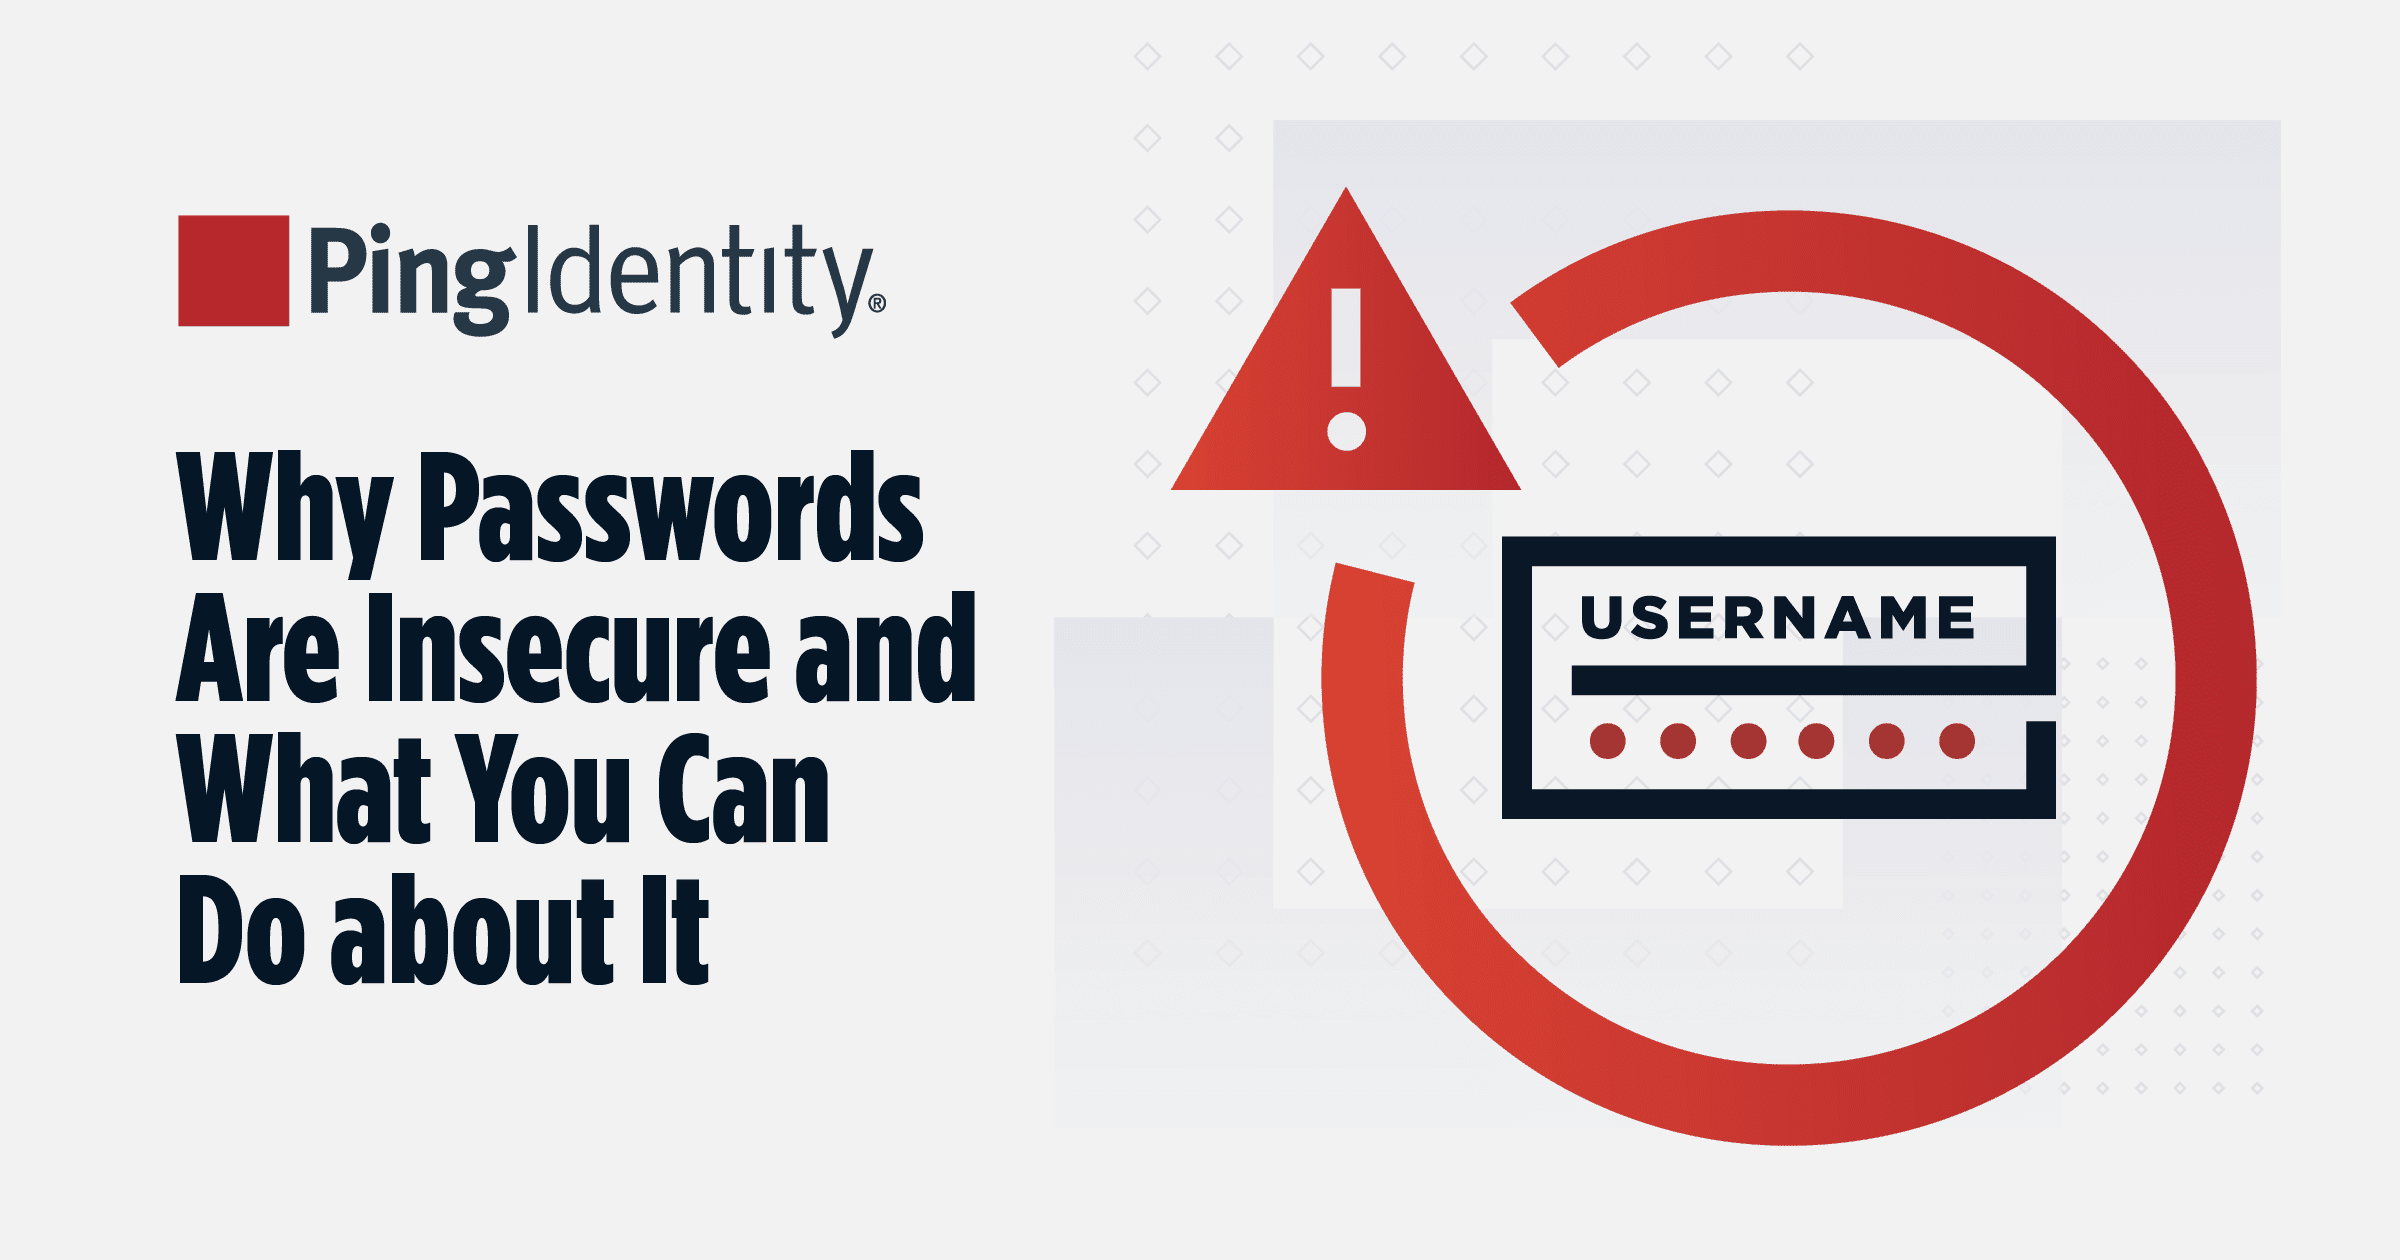 Why passwords are insecure and what you can do about it